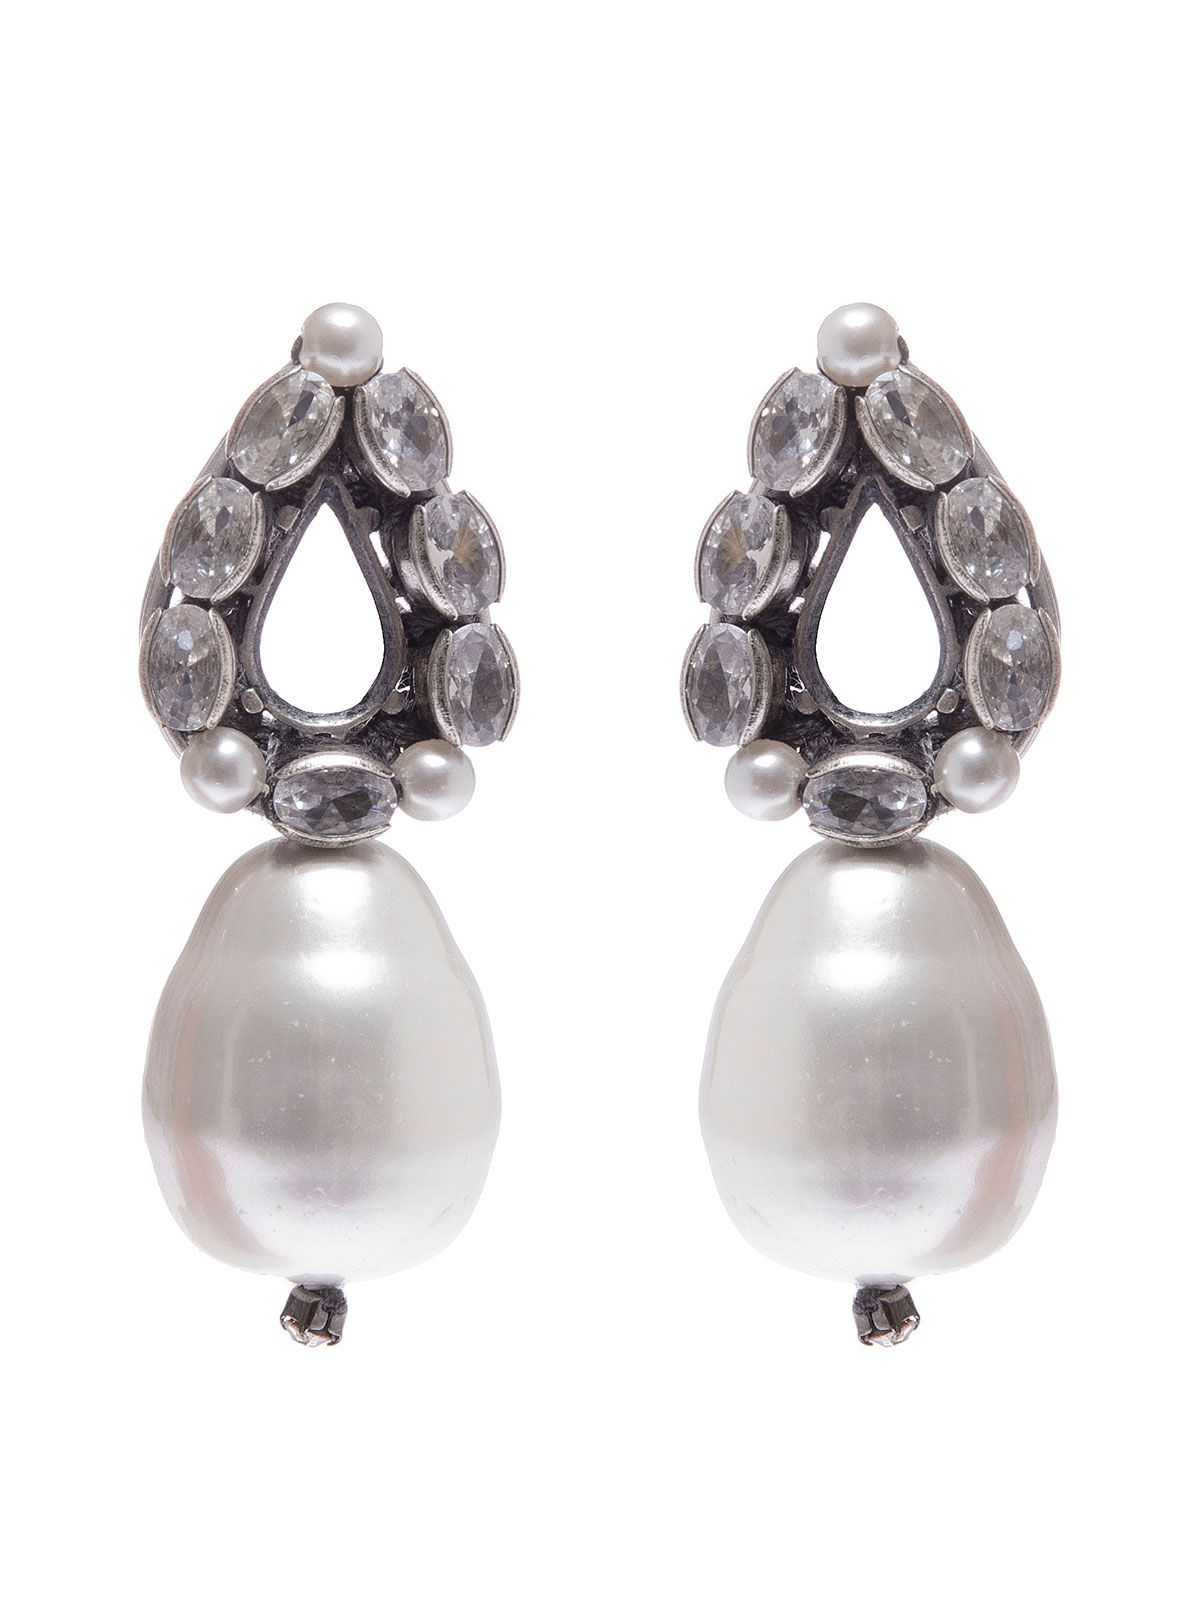 Crystal drop earrings with pendent glass pearl